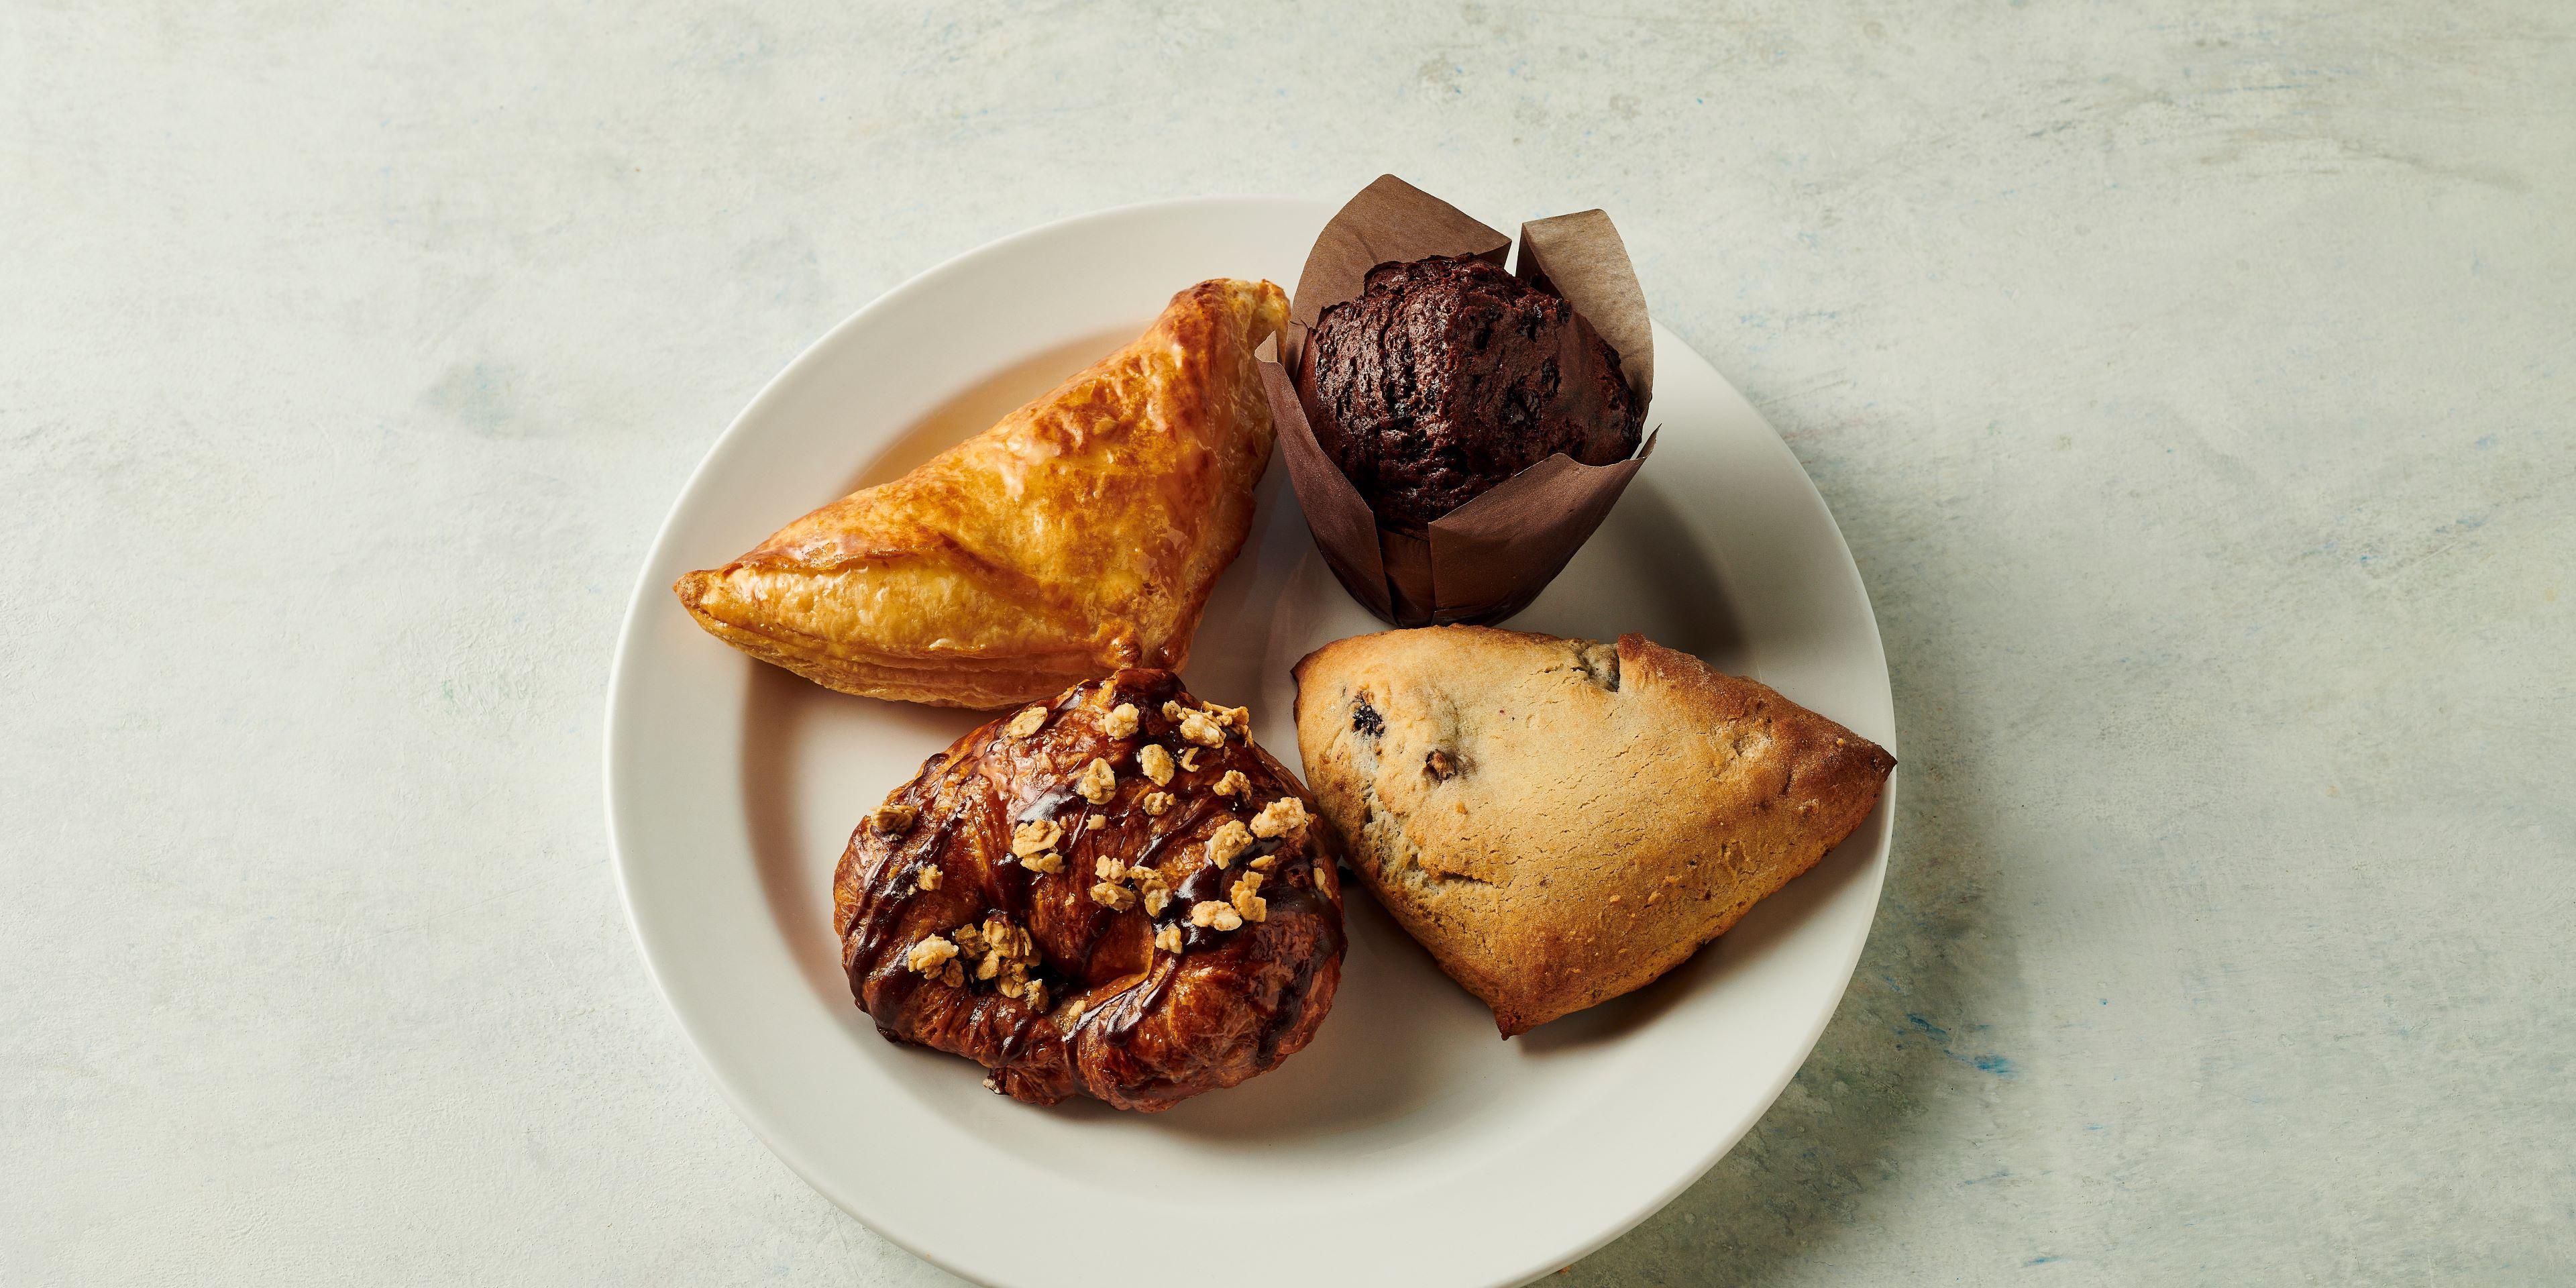 Variety of pastries, baked fresh daily